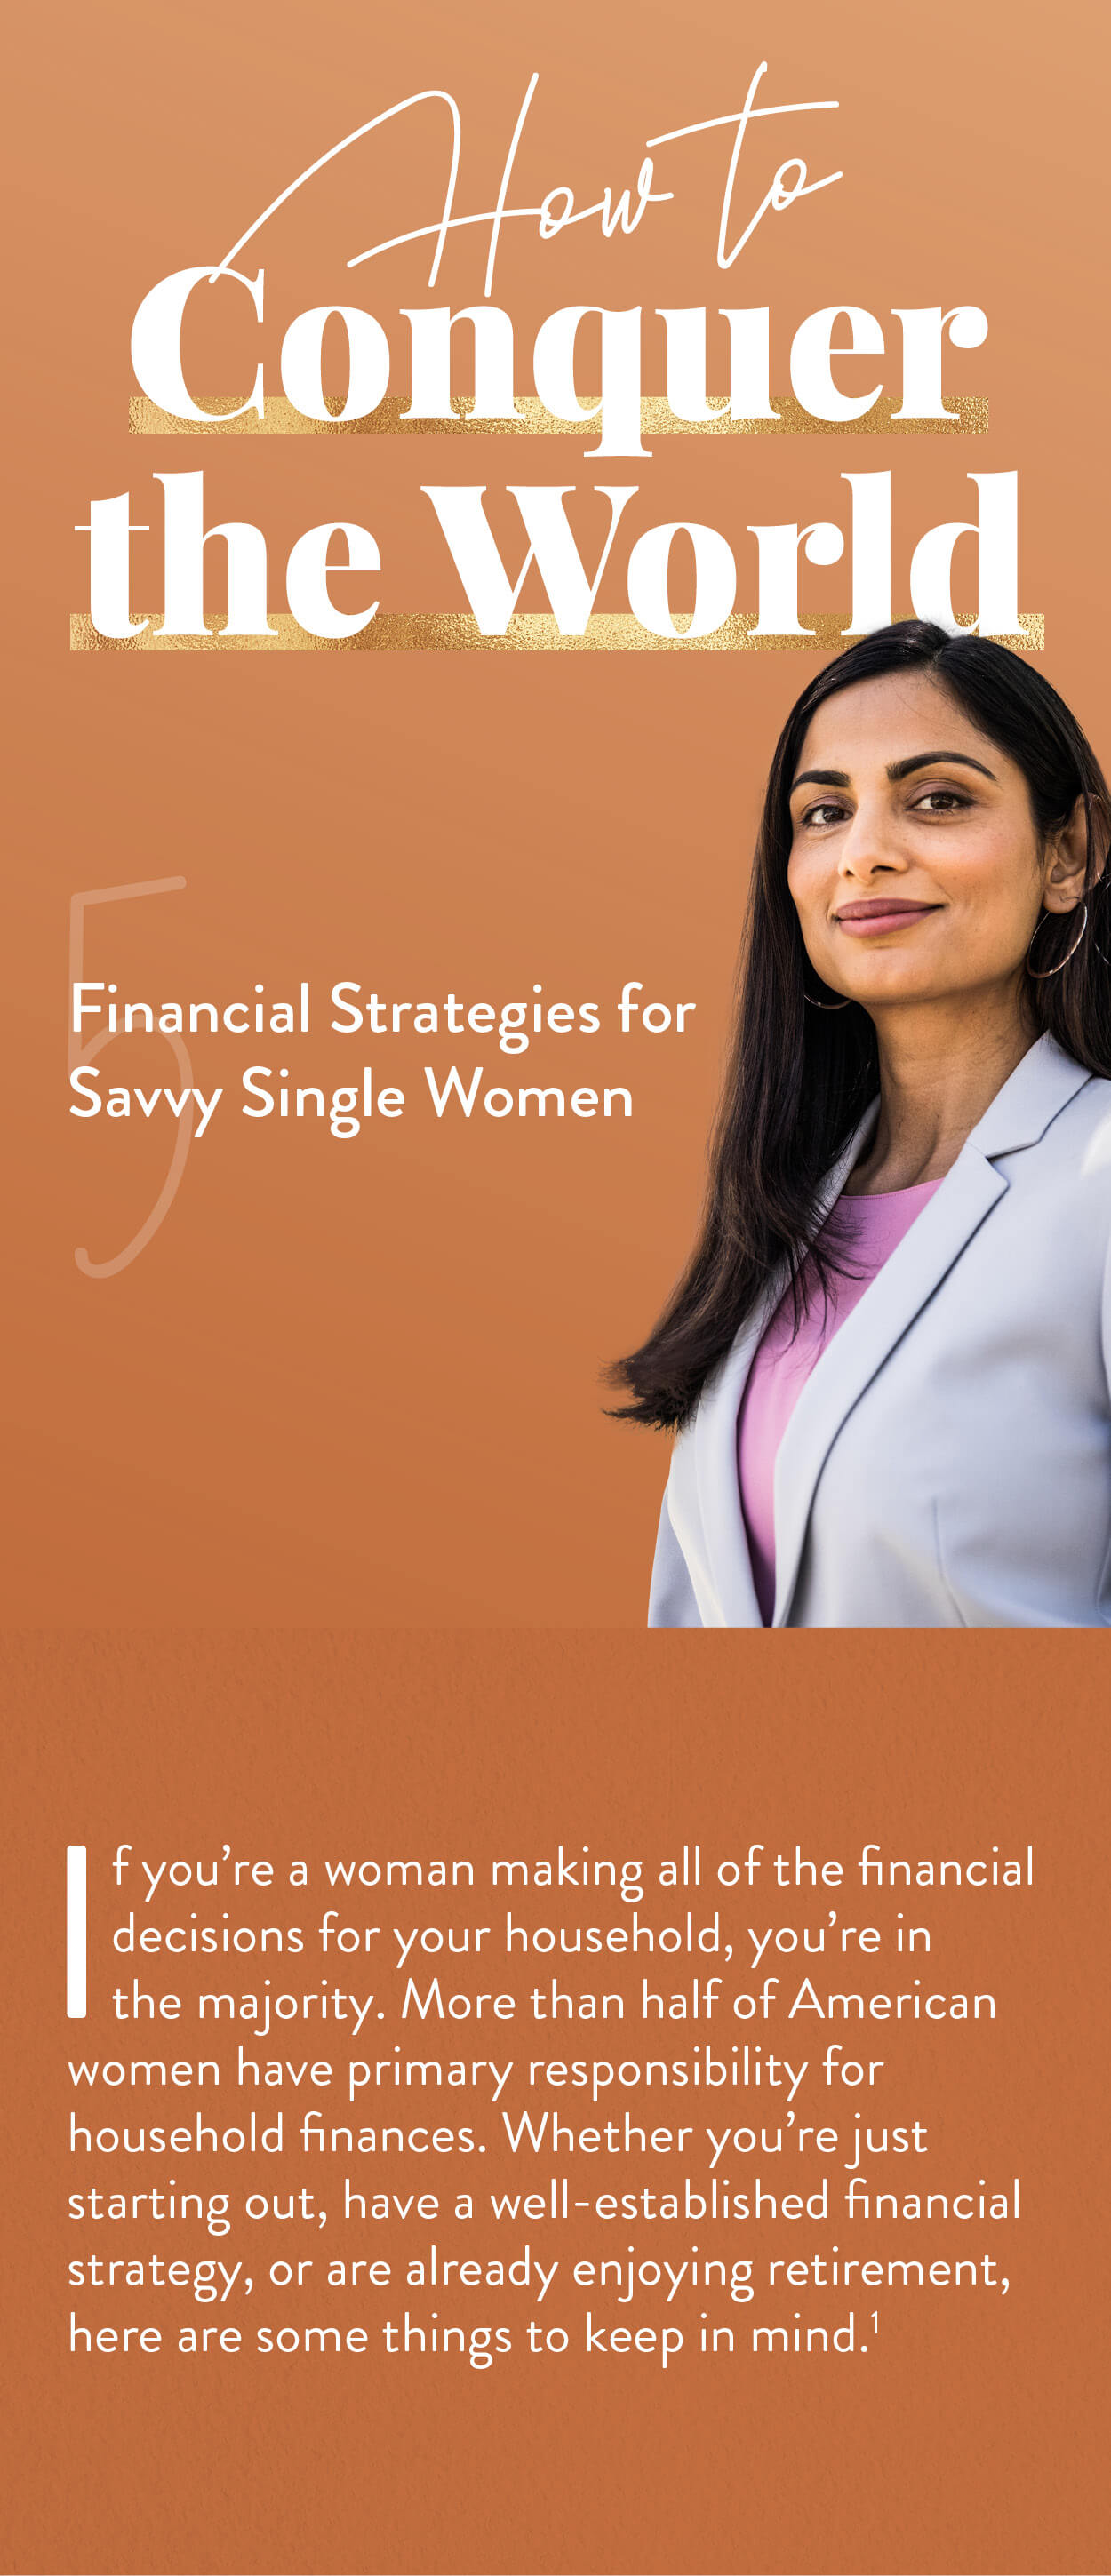 How to Conquer the World: 5 Financial Strategies for Savvy Single Women. If you’re a woman making all of the financial decisions for your household, you’re in the majority. More than half of American women have primary responsibility for household finances.Whether you’re just starting out, or have a well-established financial strategy, or are already enjoying retirement, here are some things to keep in mind.(1)